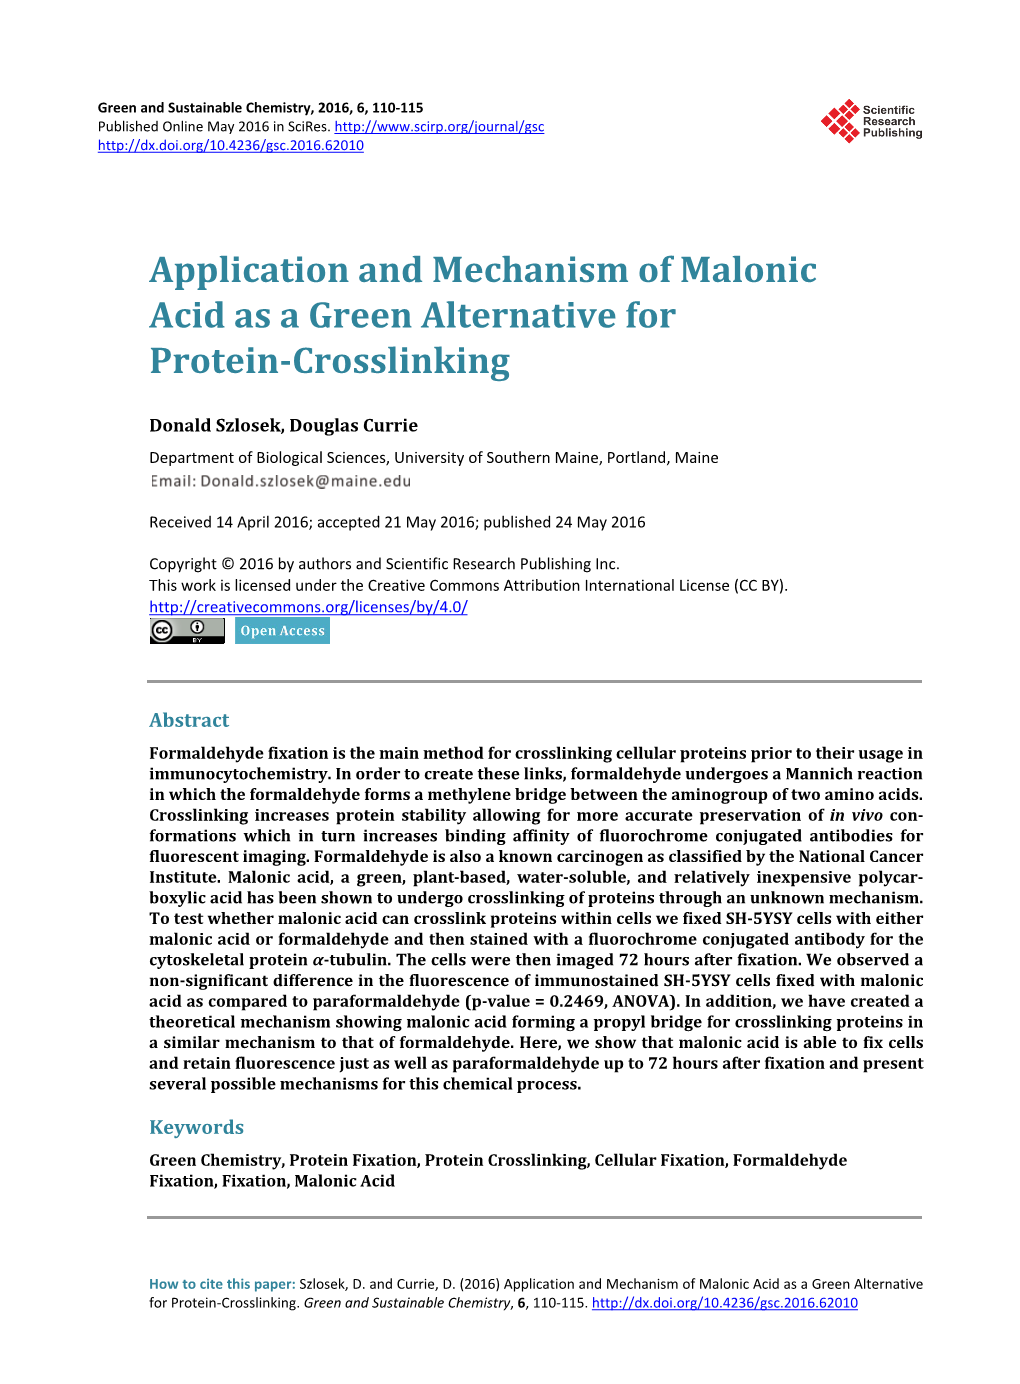 Application and Mechanism of Malonic Acid As a Green Alternative for Protein-Crosslinking